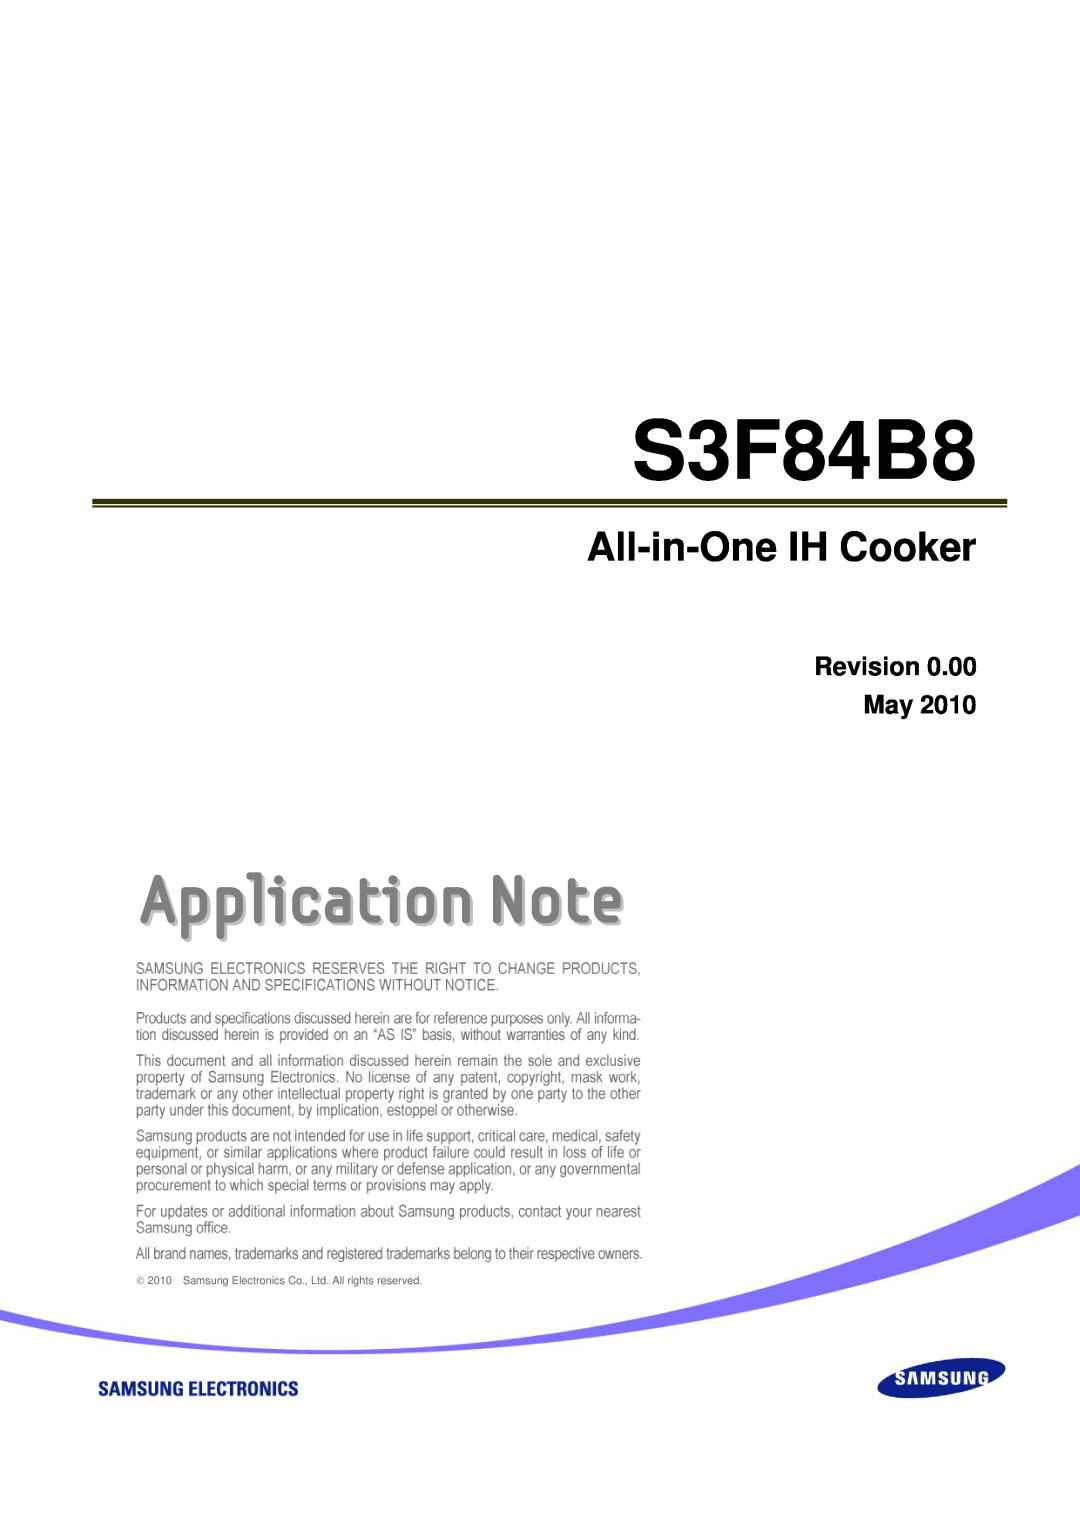 Samsung S3F84B8 manual Revision May, Application Note, All-in-One IH Cooker 